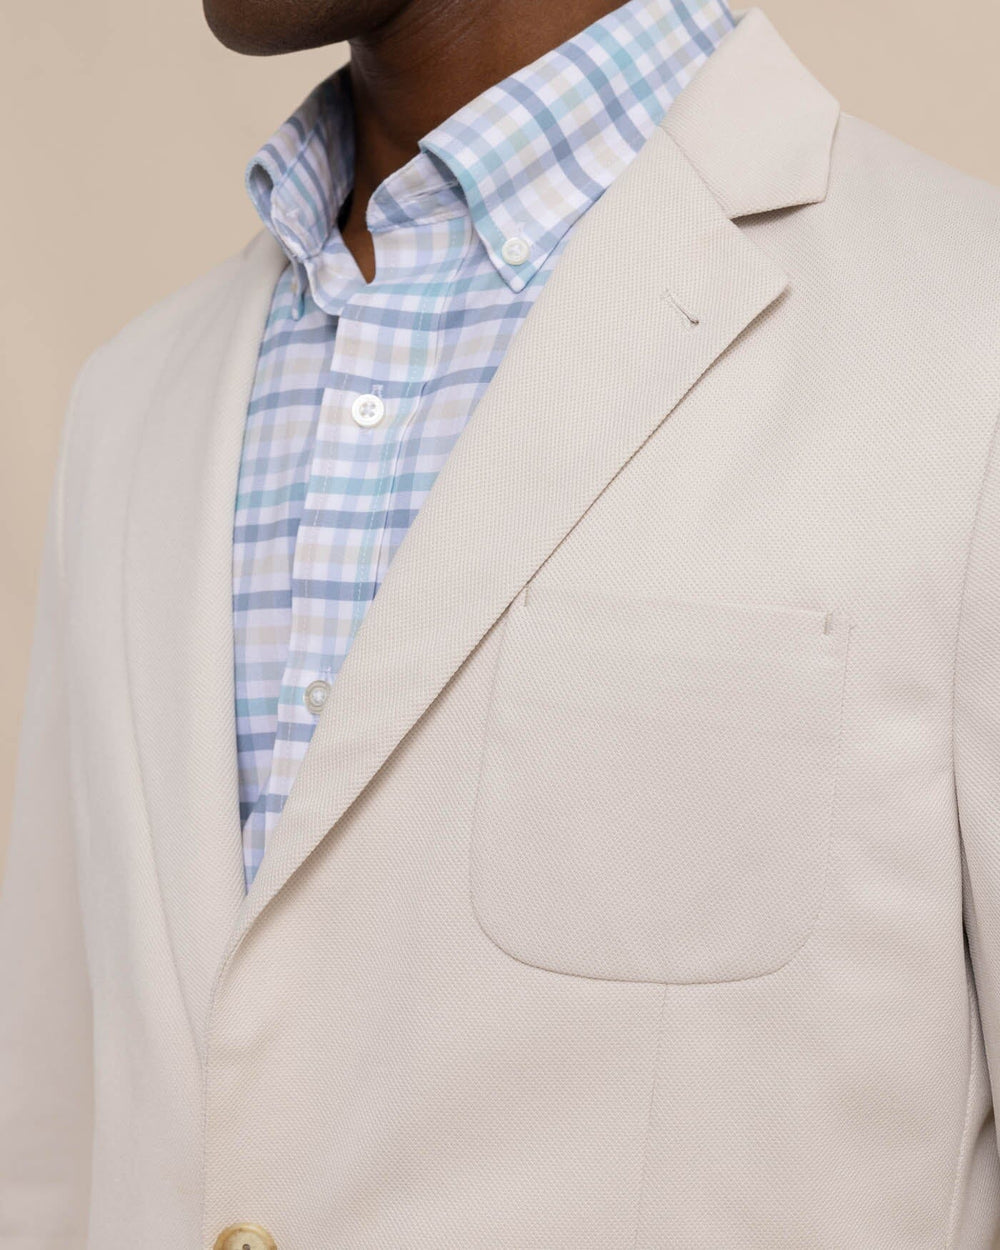 The detail view of the Southern Tide charleston-navy-blazer by Southern Tide - Perfectly Pale Khaki